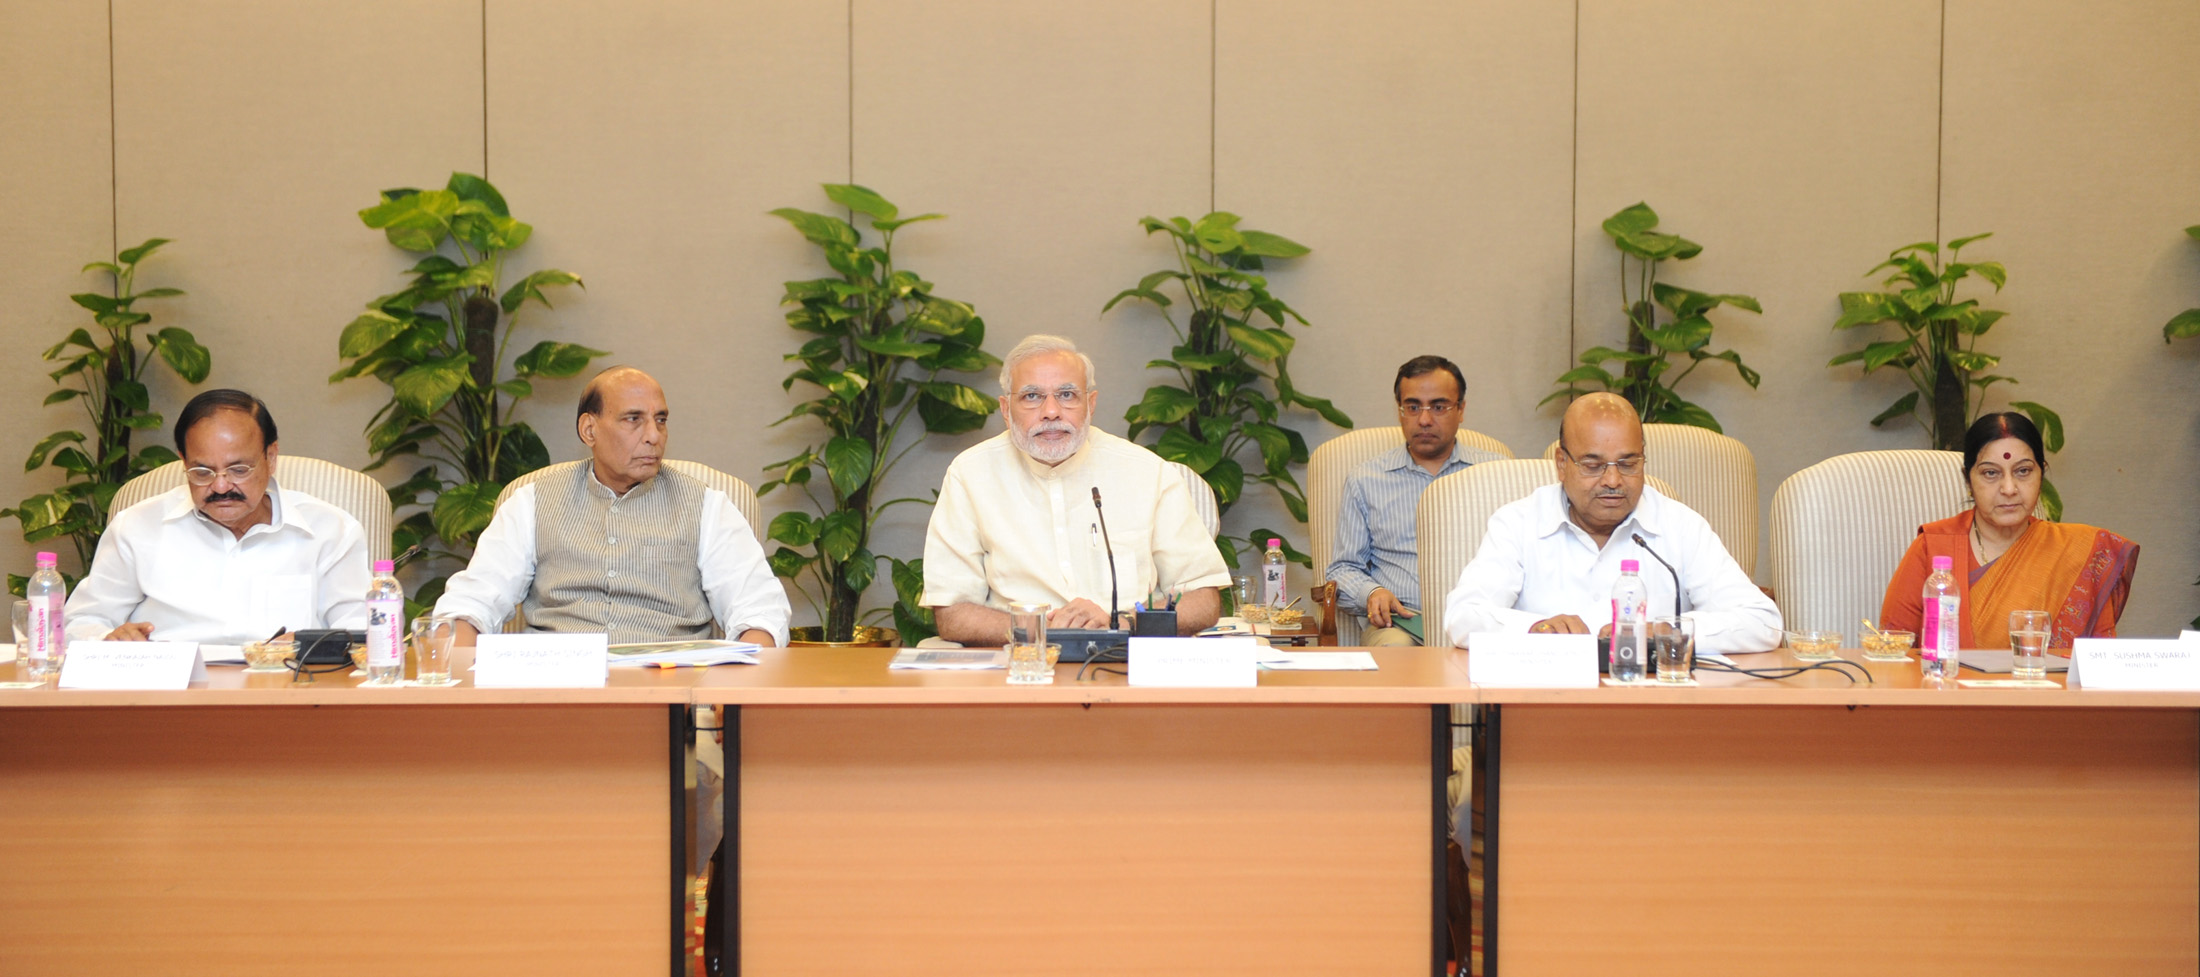 The Prime Minister, Shri Narendra Modi chairing the meeting of the National Committee on Nation-wide Celebration of 125th Birth Anniversary of the Dr. B.R. Ambedkar, in New Delhi on July 23, 2015.